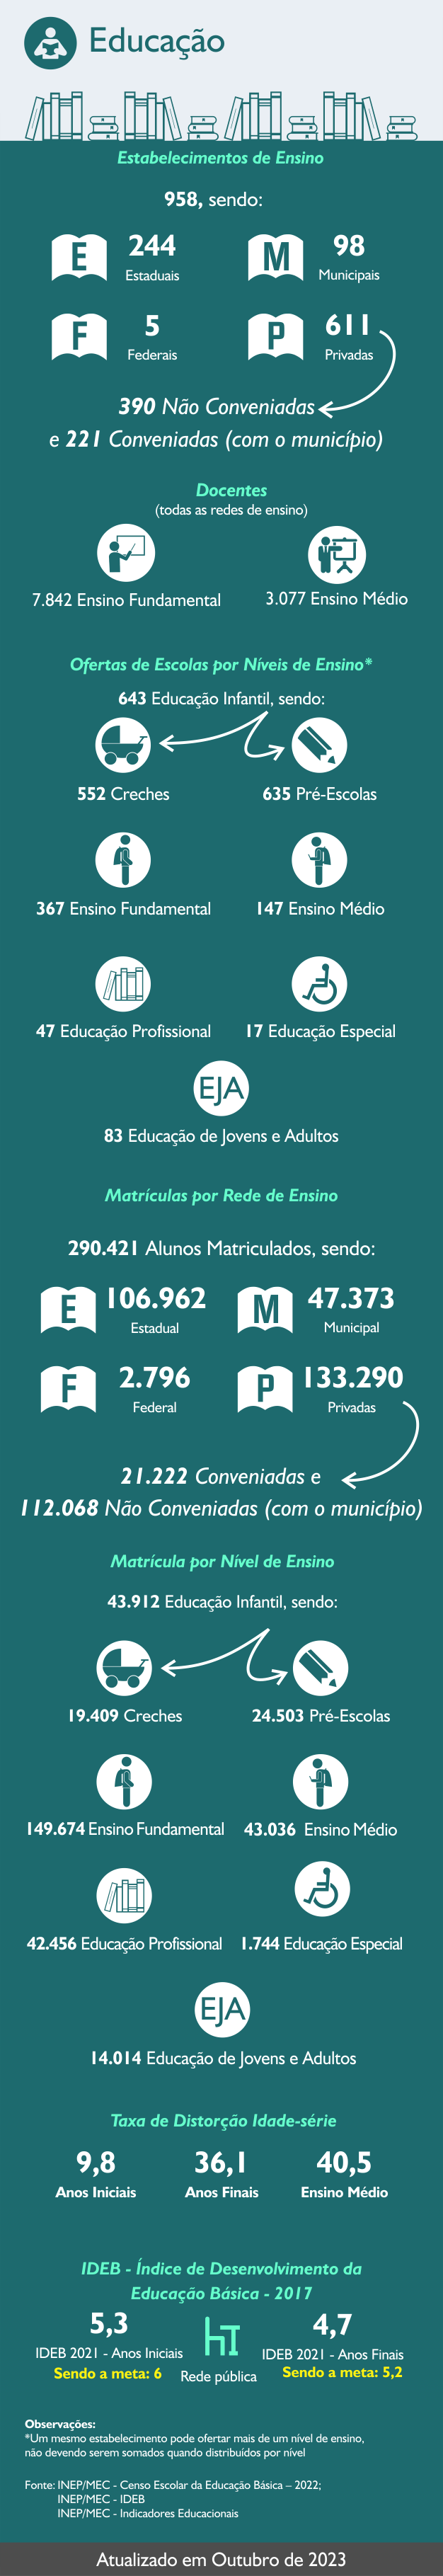 Infograficos - Educacao 2023-out-002.png